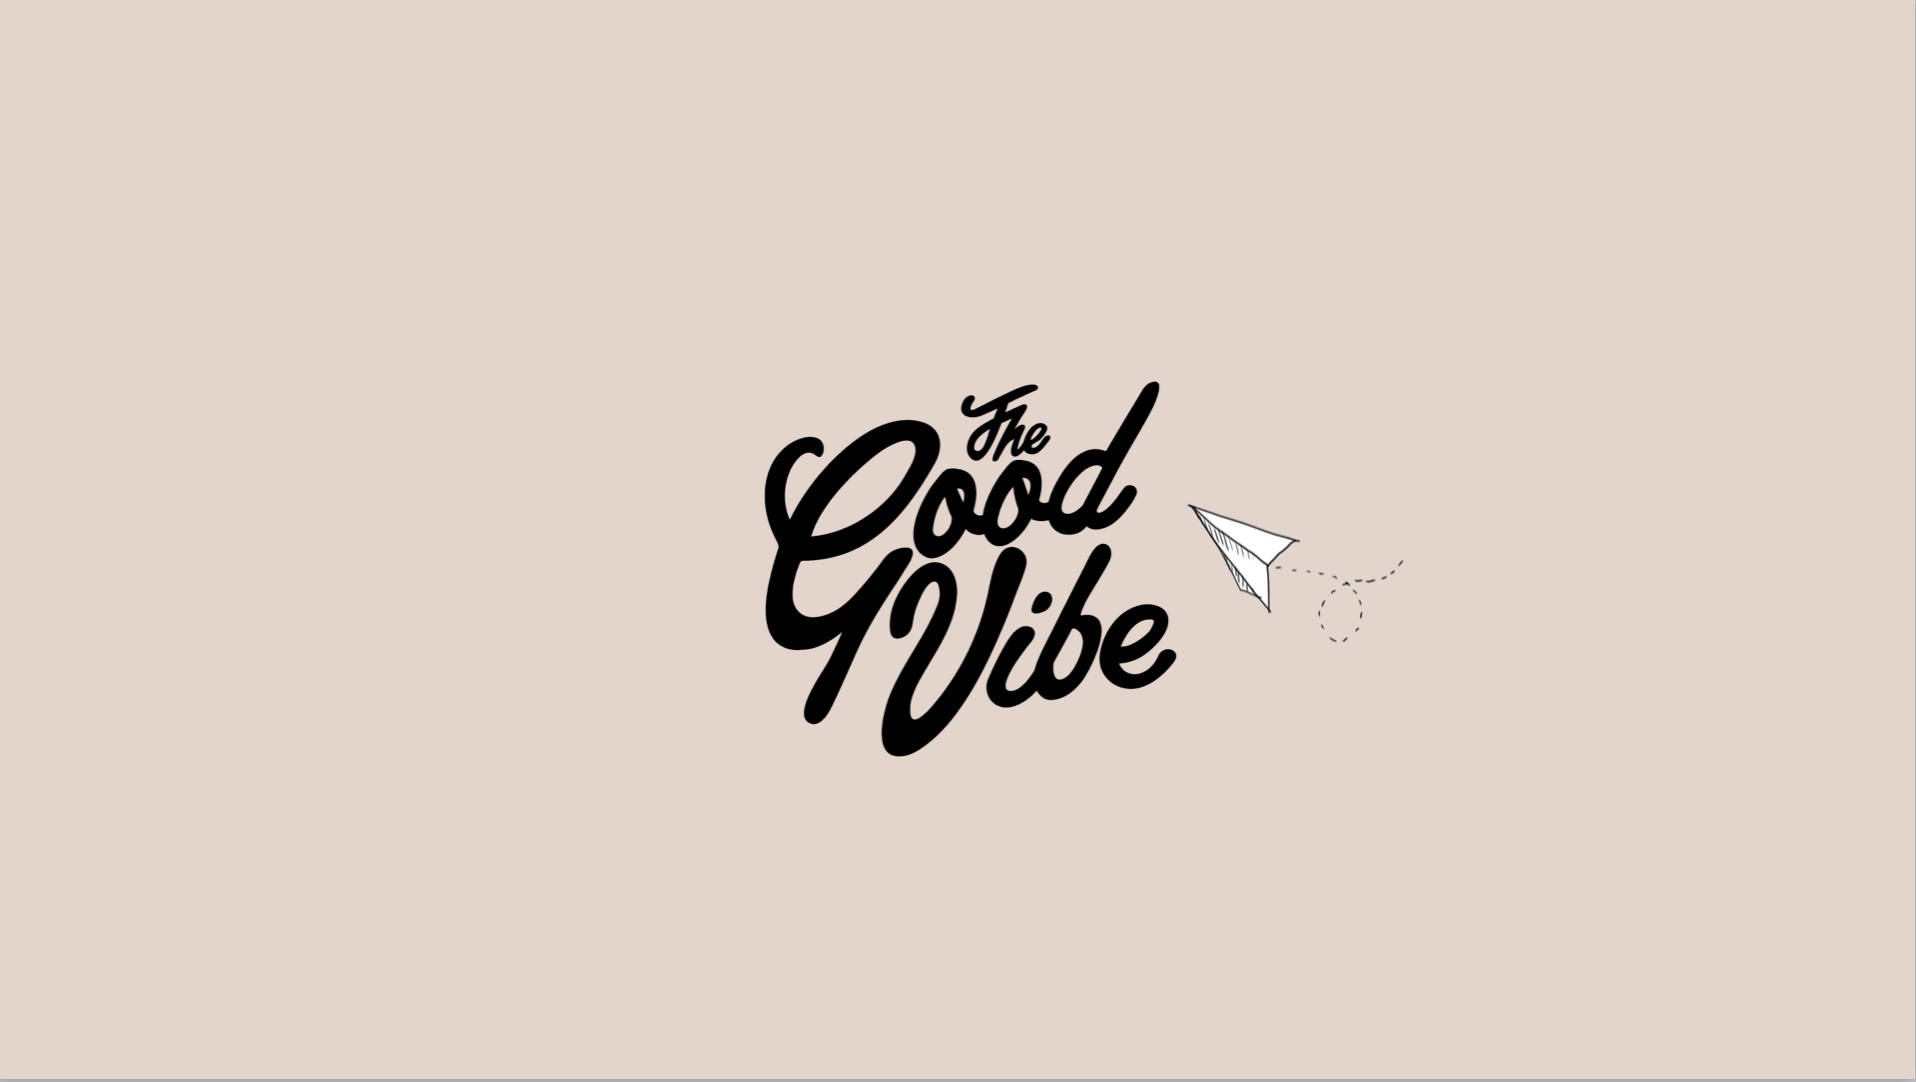 The Good Vibe Background